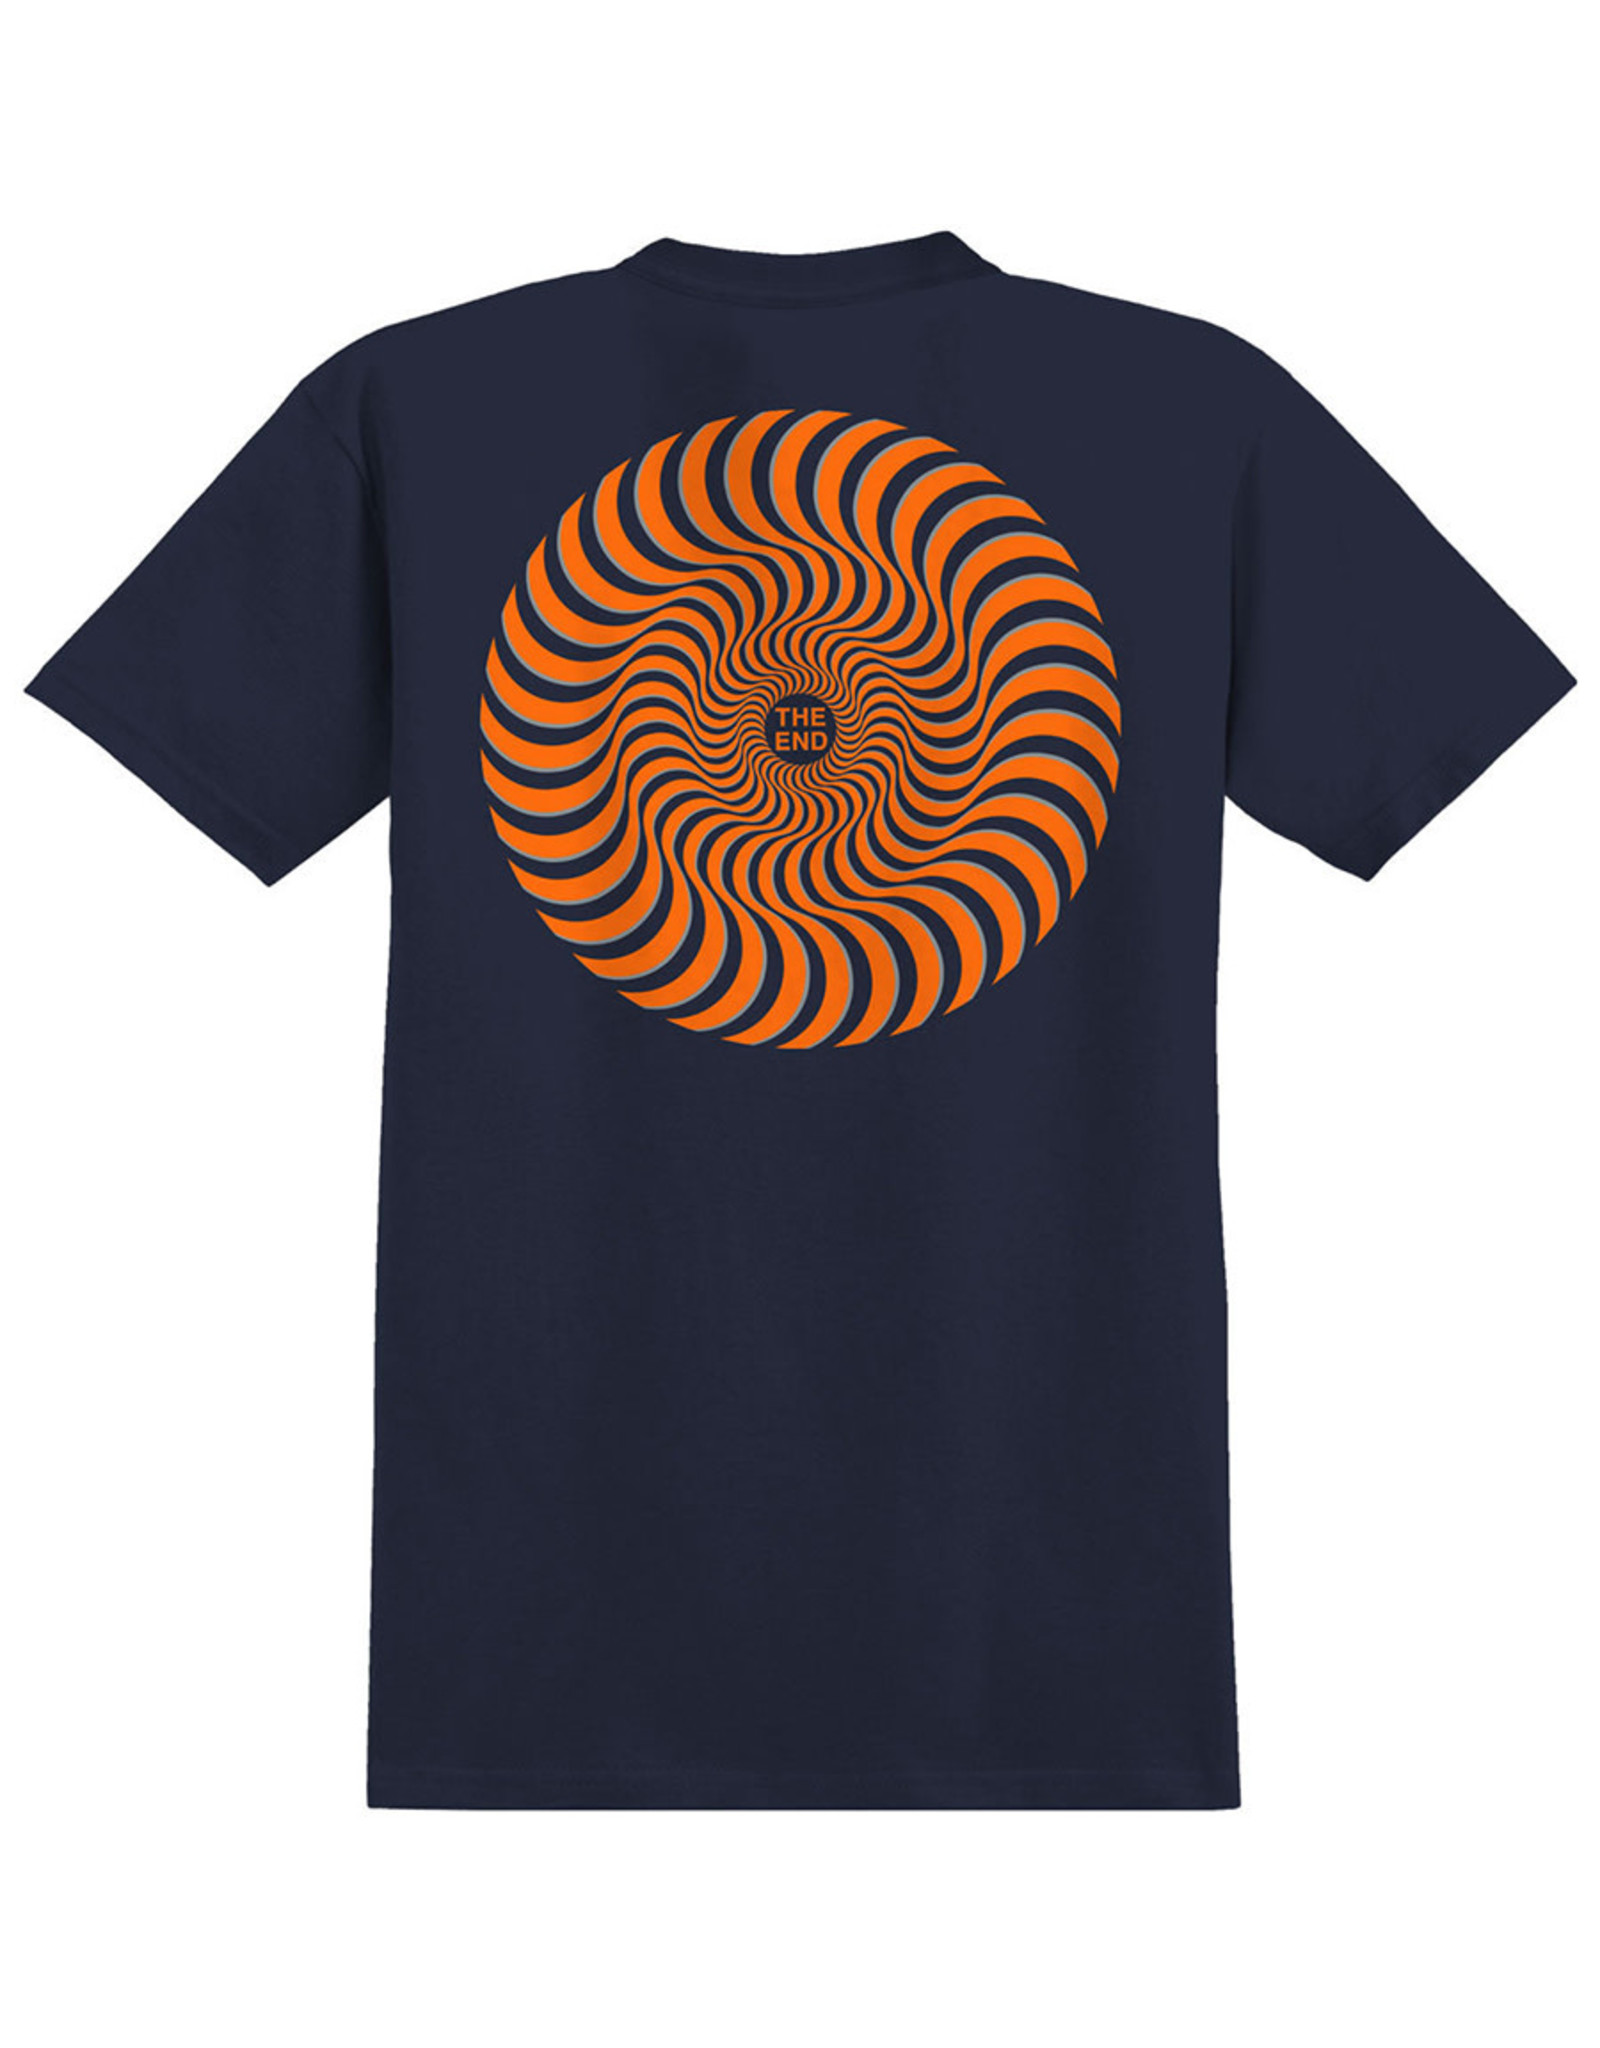 Spitfire Spitfire Tee Classic Swirl Overly S/S (Navy)